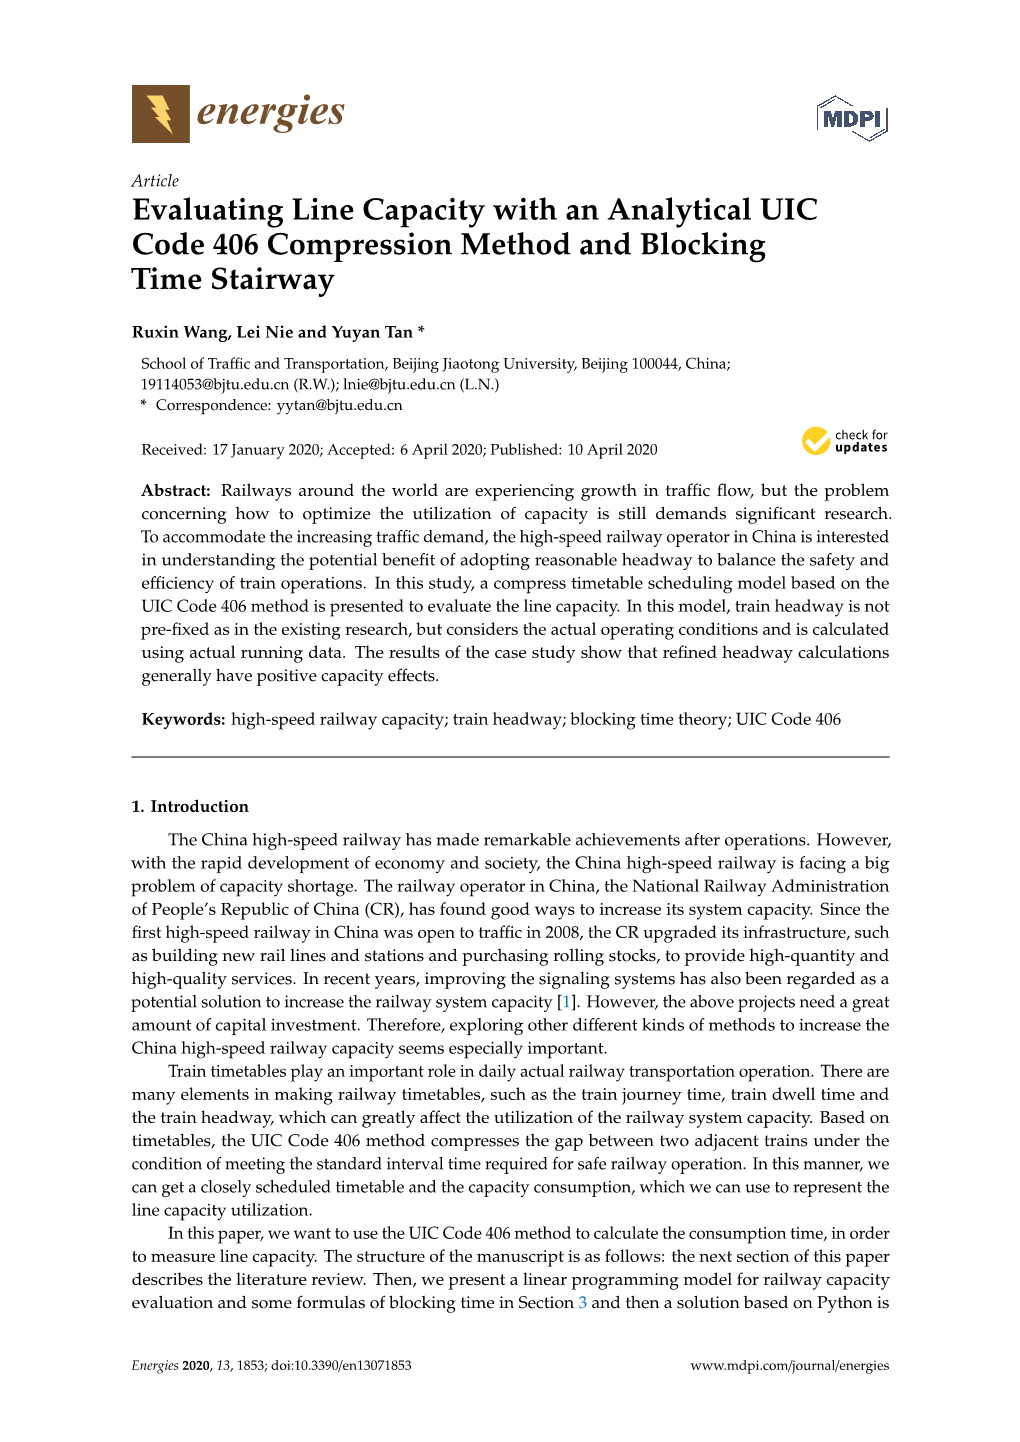 Evaluating Line Capacity with an Analytical UIC Code 406 Compression Method and Blocking Time Stairway